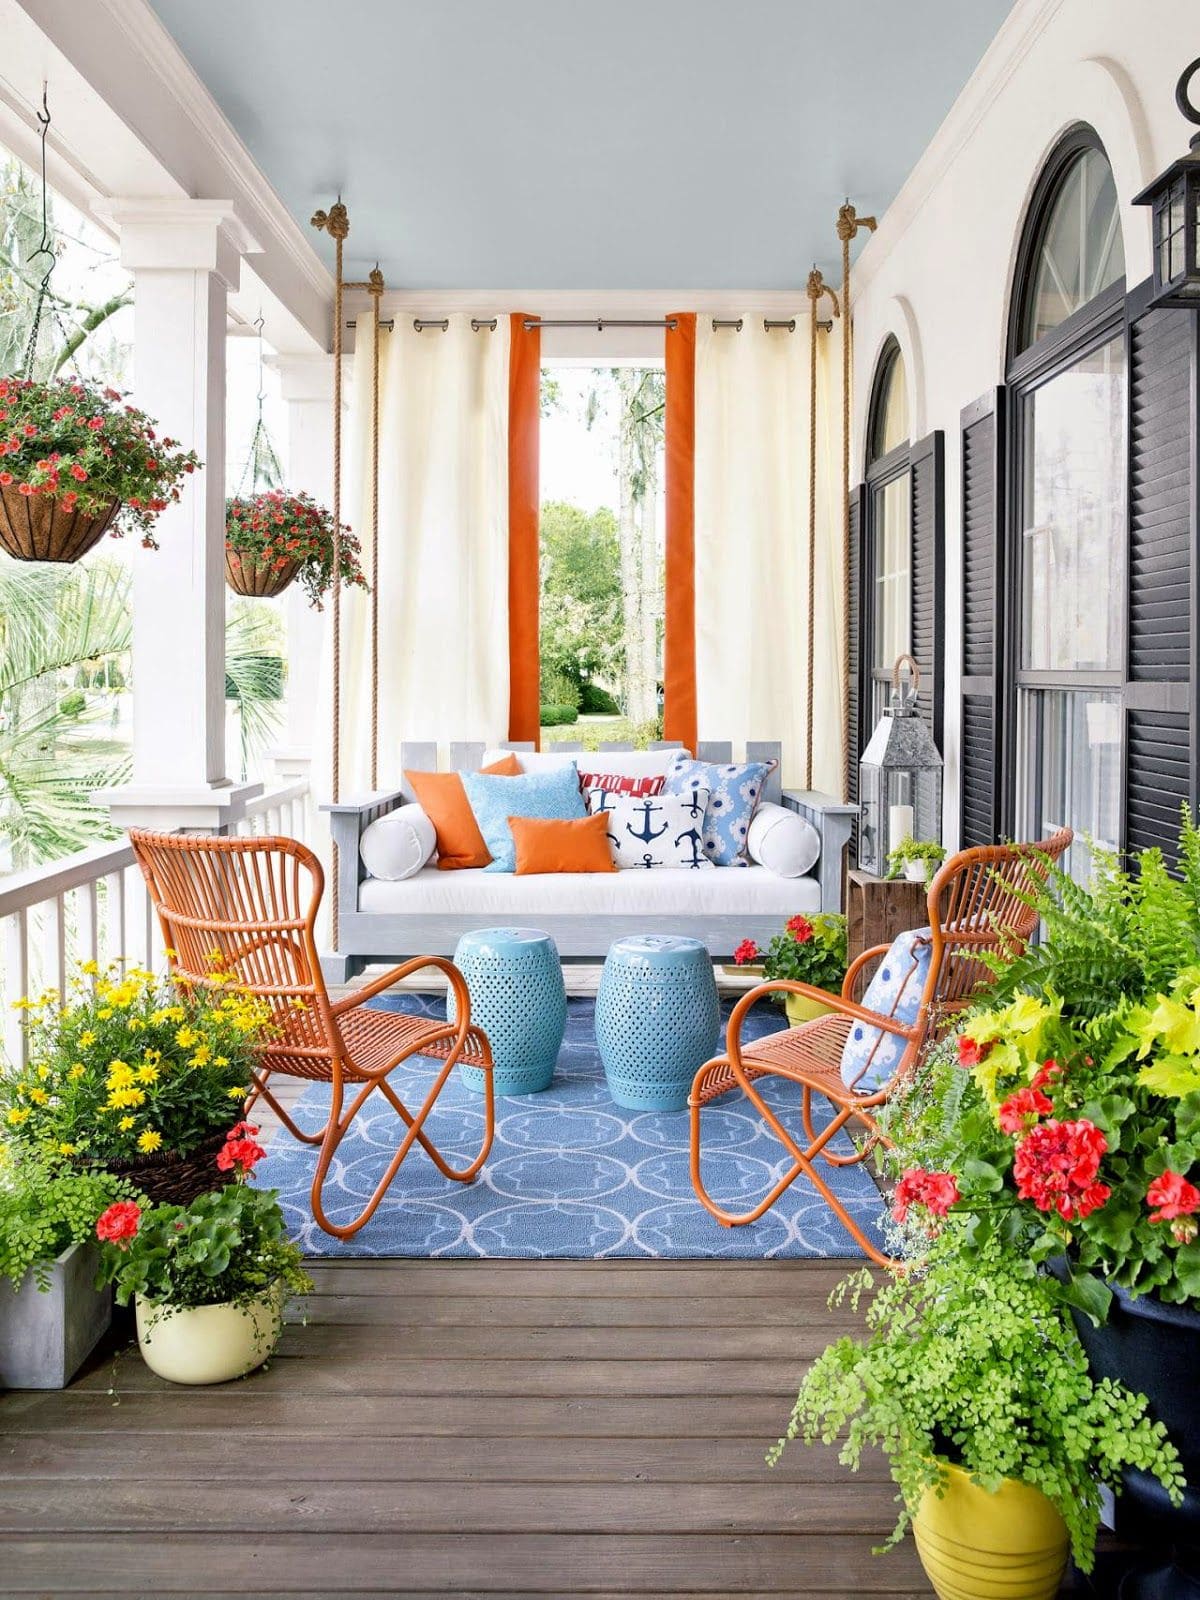 24 ideas to decorate your porch with plants - 73